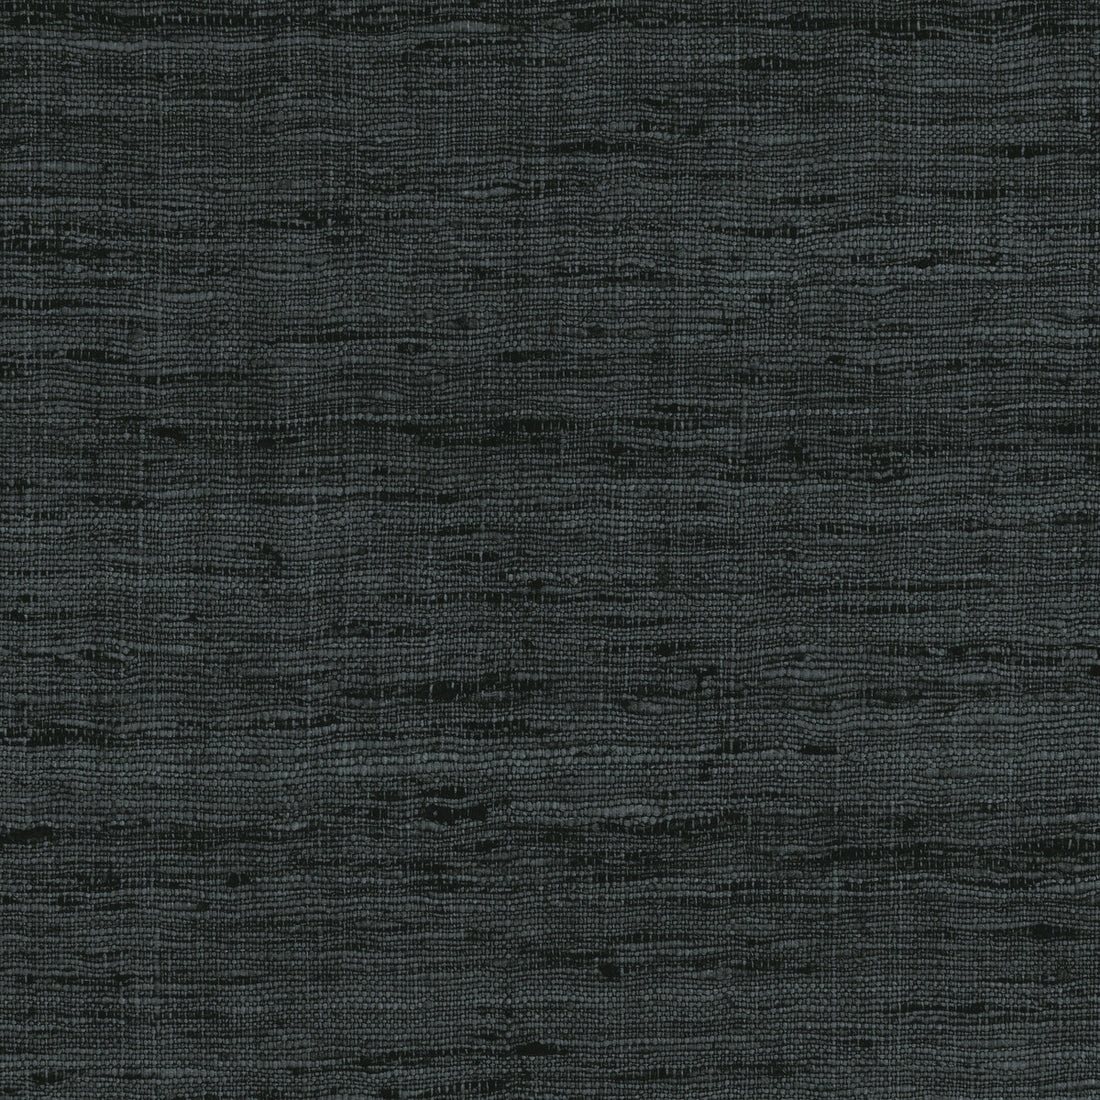 Sonoma fabric in tar color - pattern GWF-3109.821.0 - by Lee Jofa Modern in the Kelly Wearstler VI collection